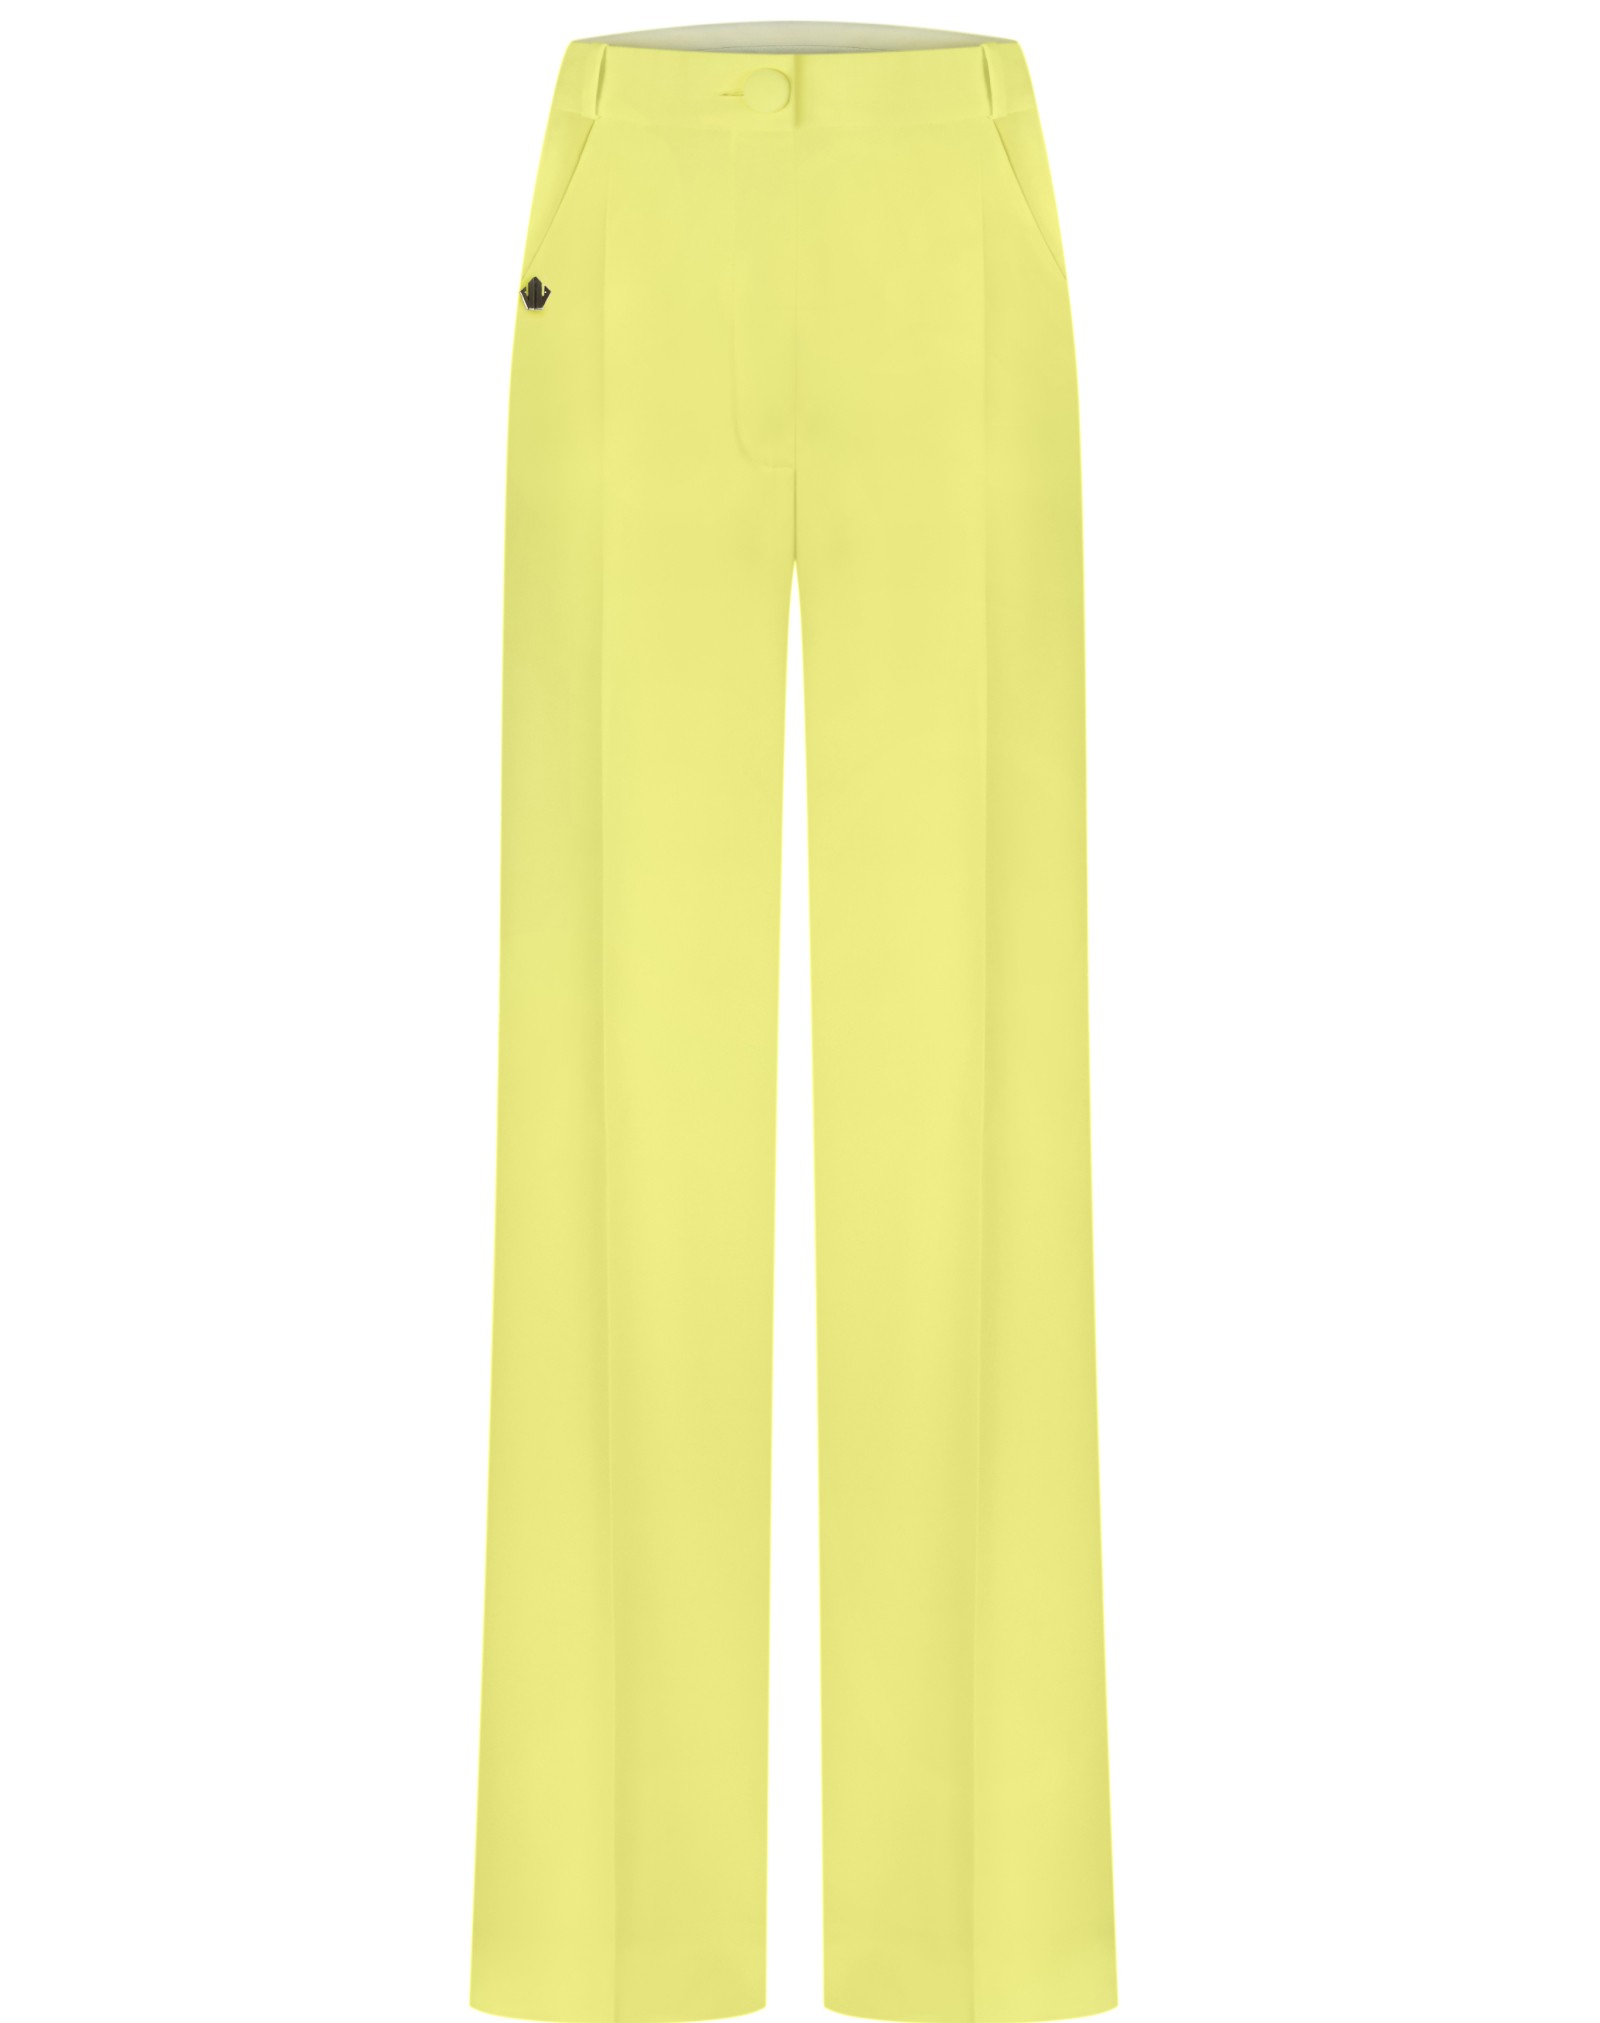 Pants with arrows made of suit fabric yellow